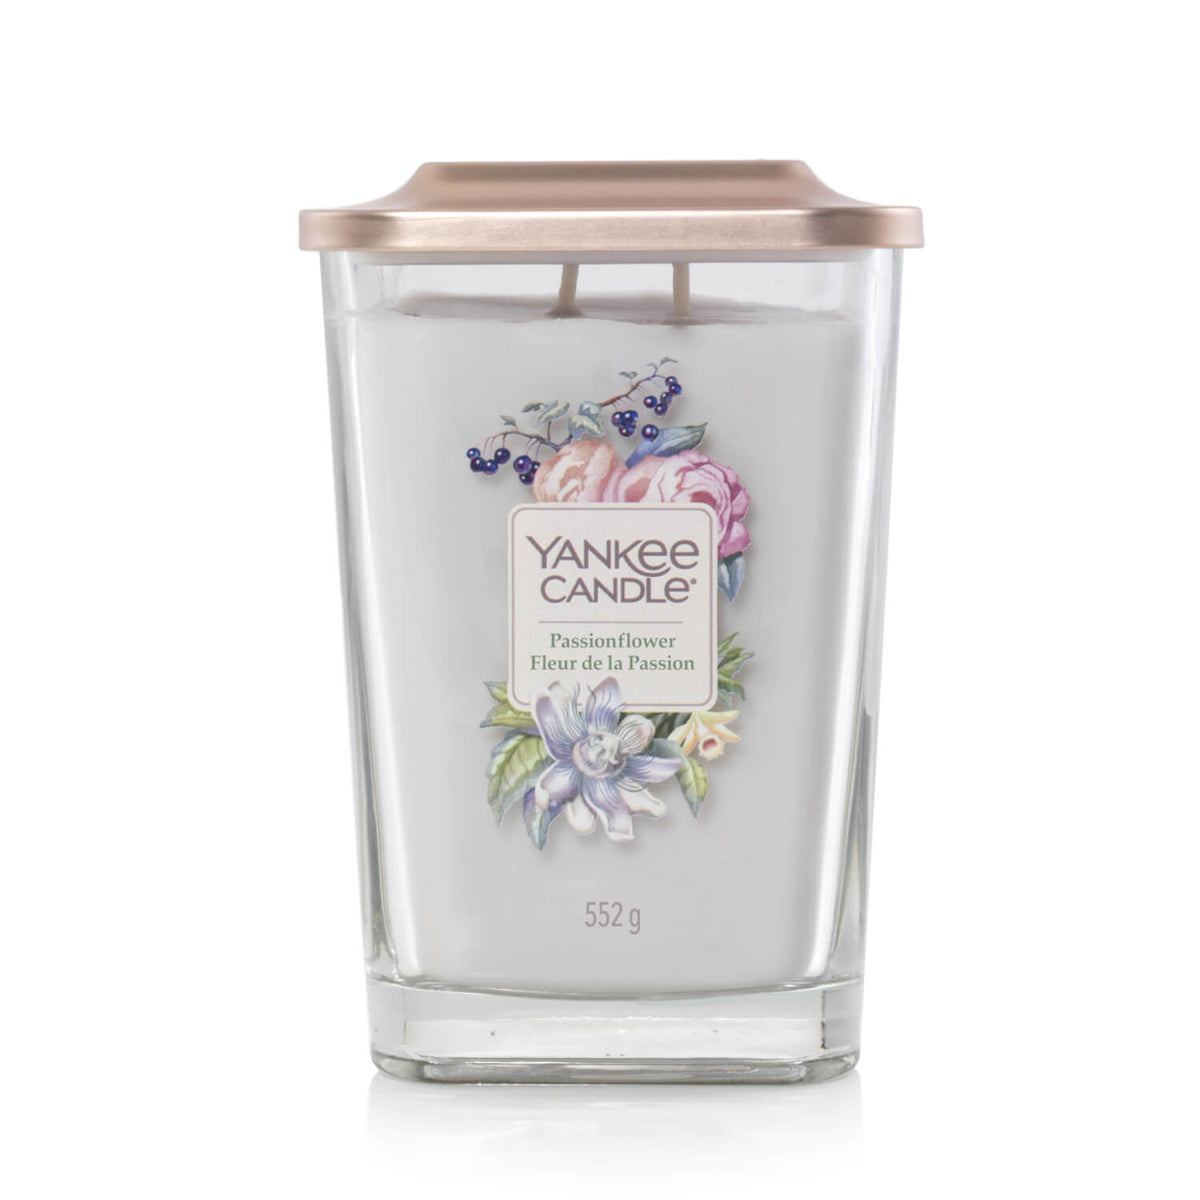 Elevation Large Jar 2-Wick Candle - Passionflower